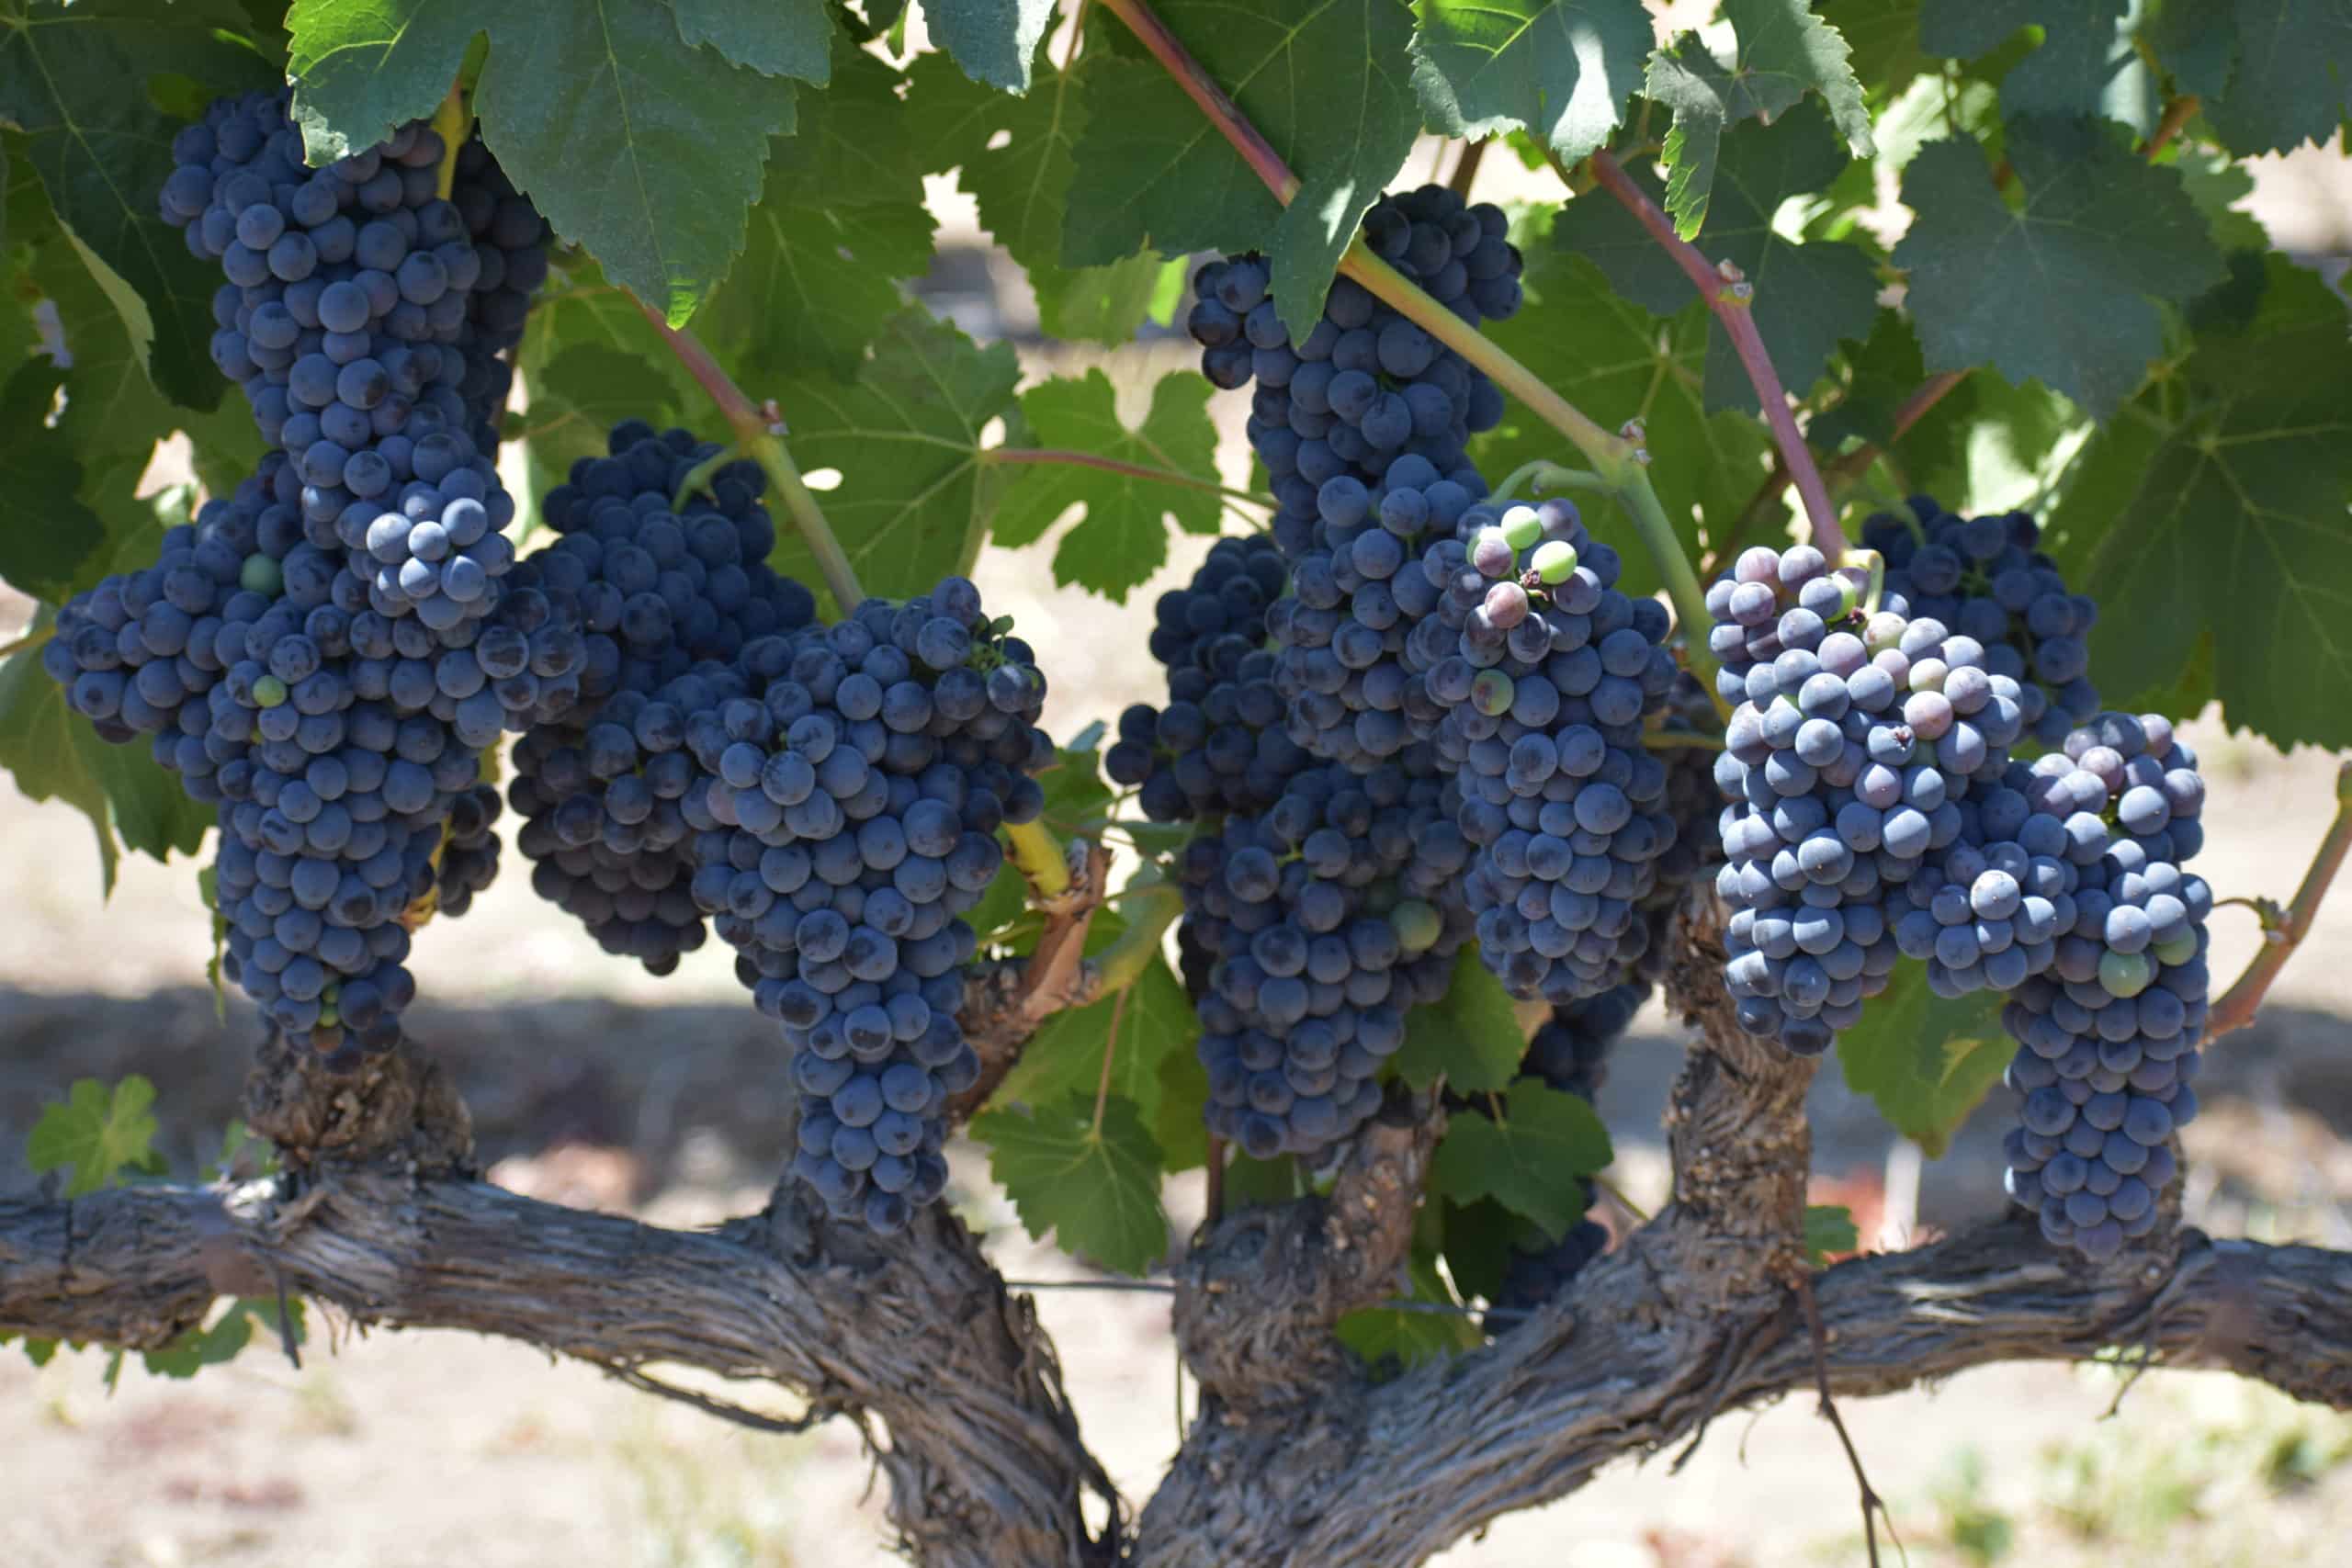 Petite Sirah from Rutherford, Napa Valley, used for the Royal Punishers.